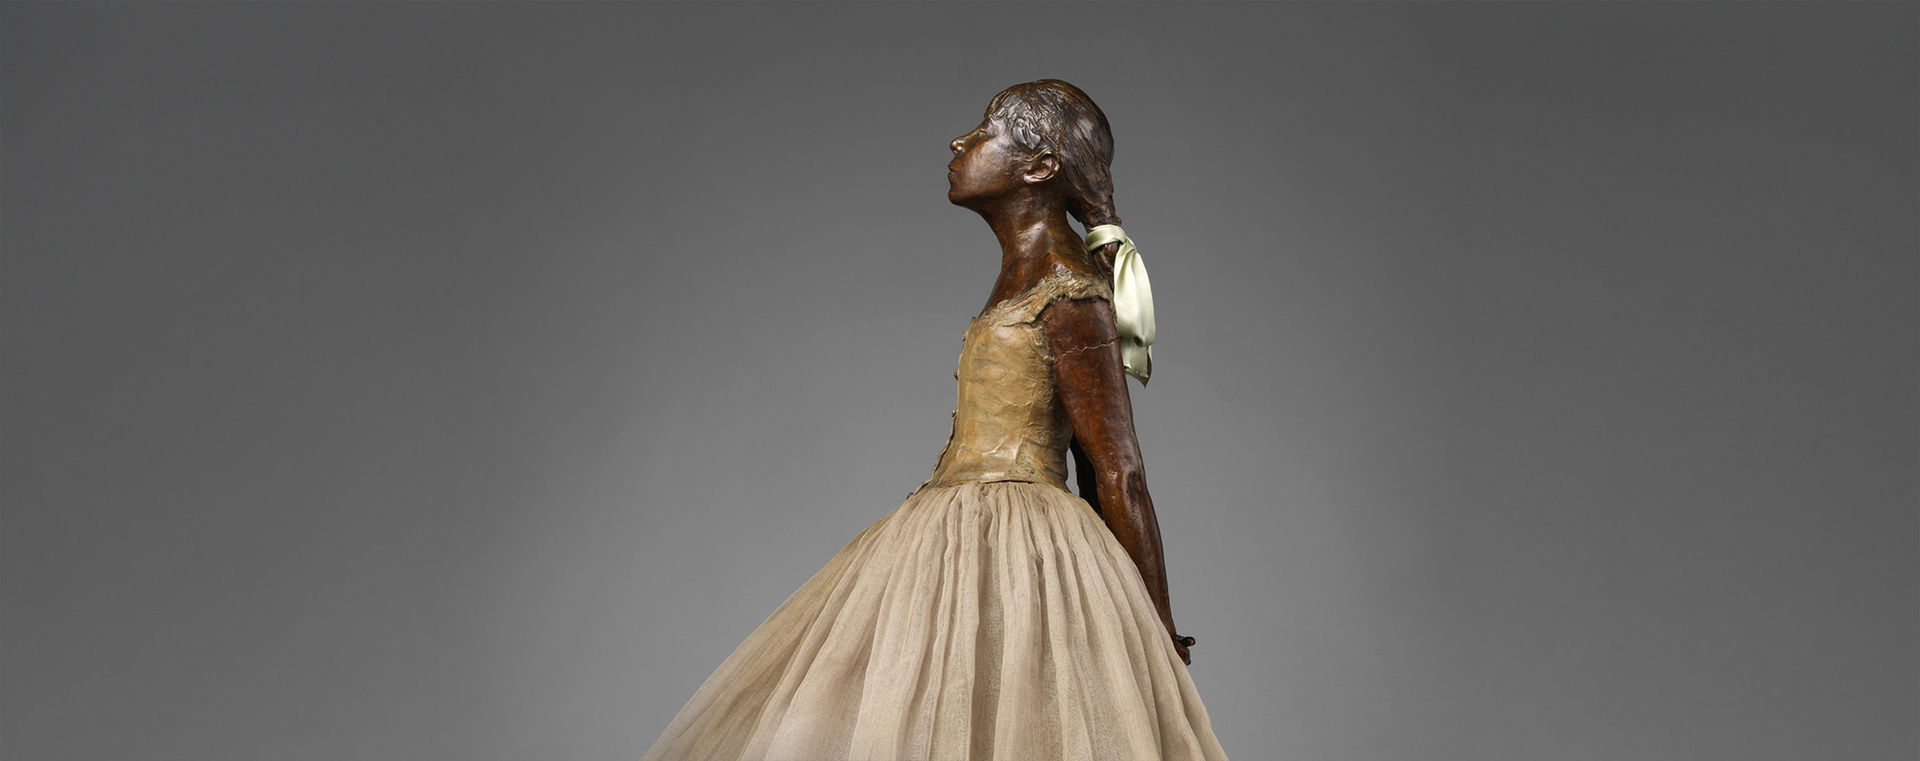 Detail of Degas bronze sculpture showing young girl in ballet dress gazing upward, her hair tied back with a satin ribbon.